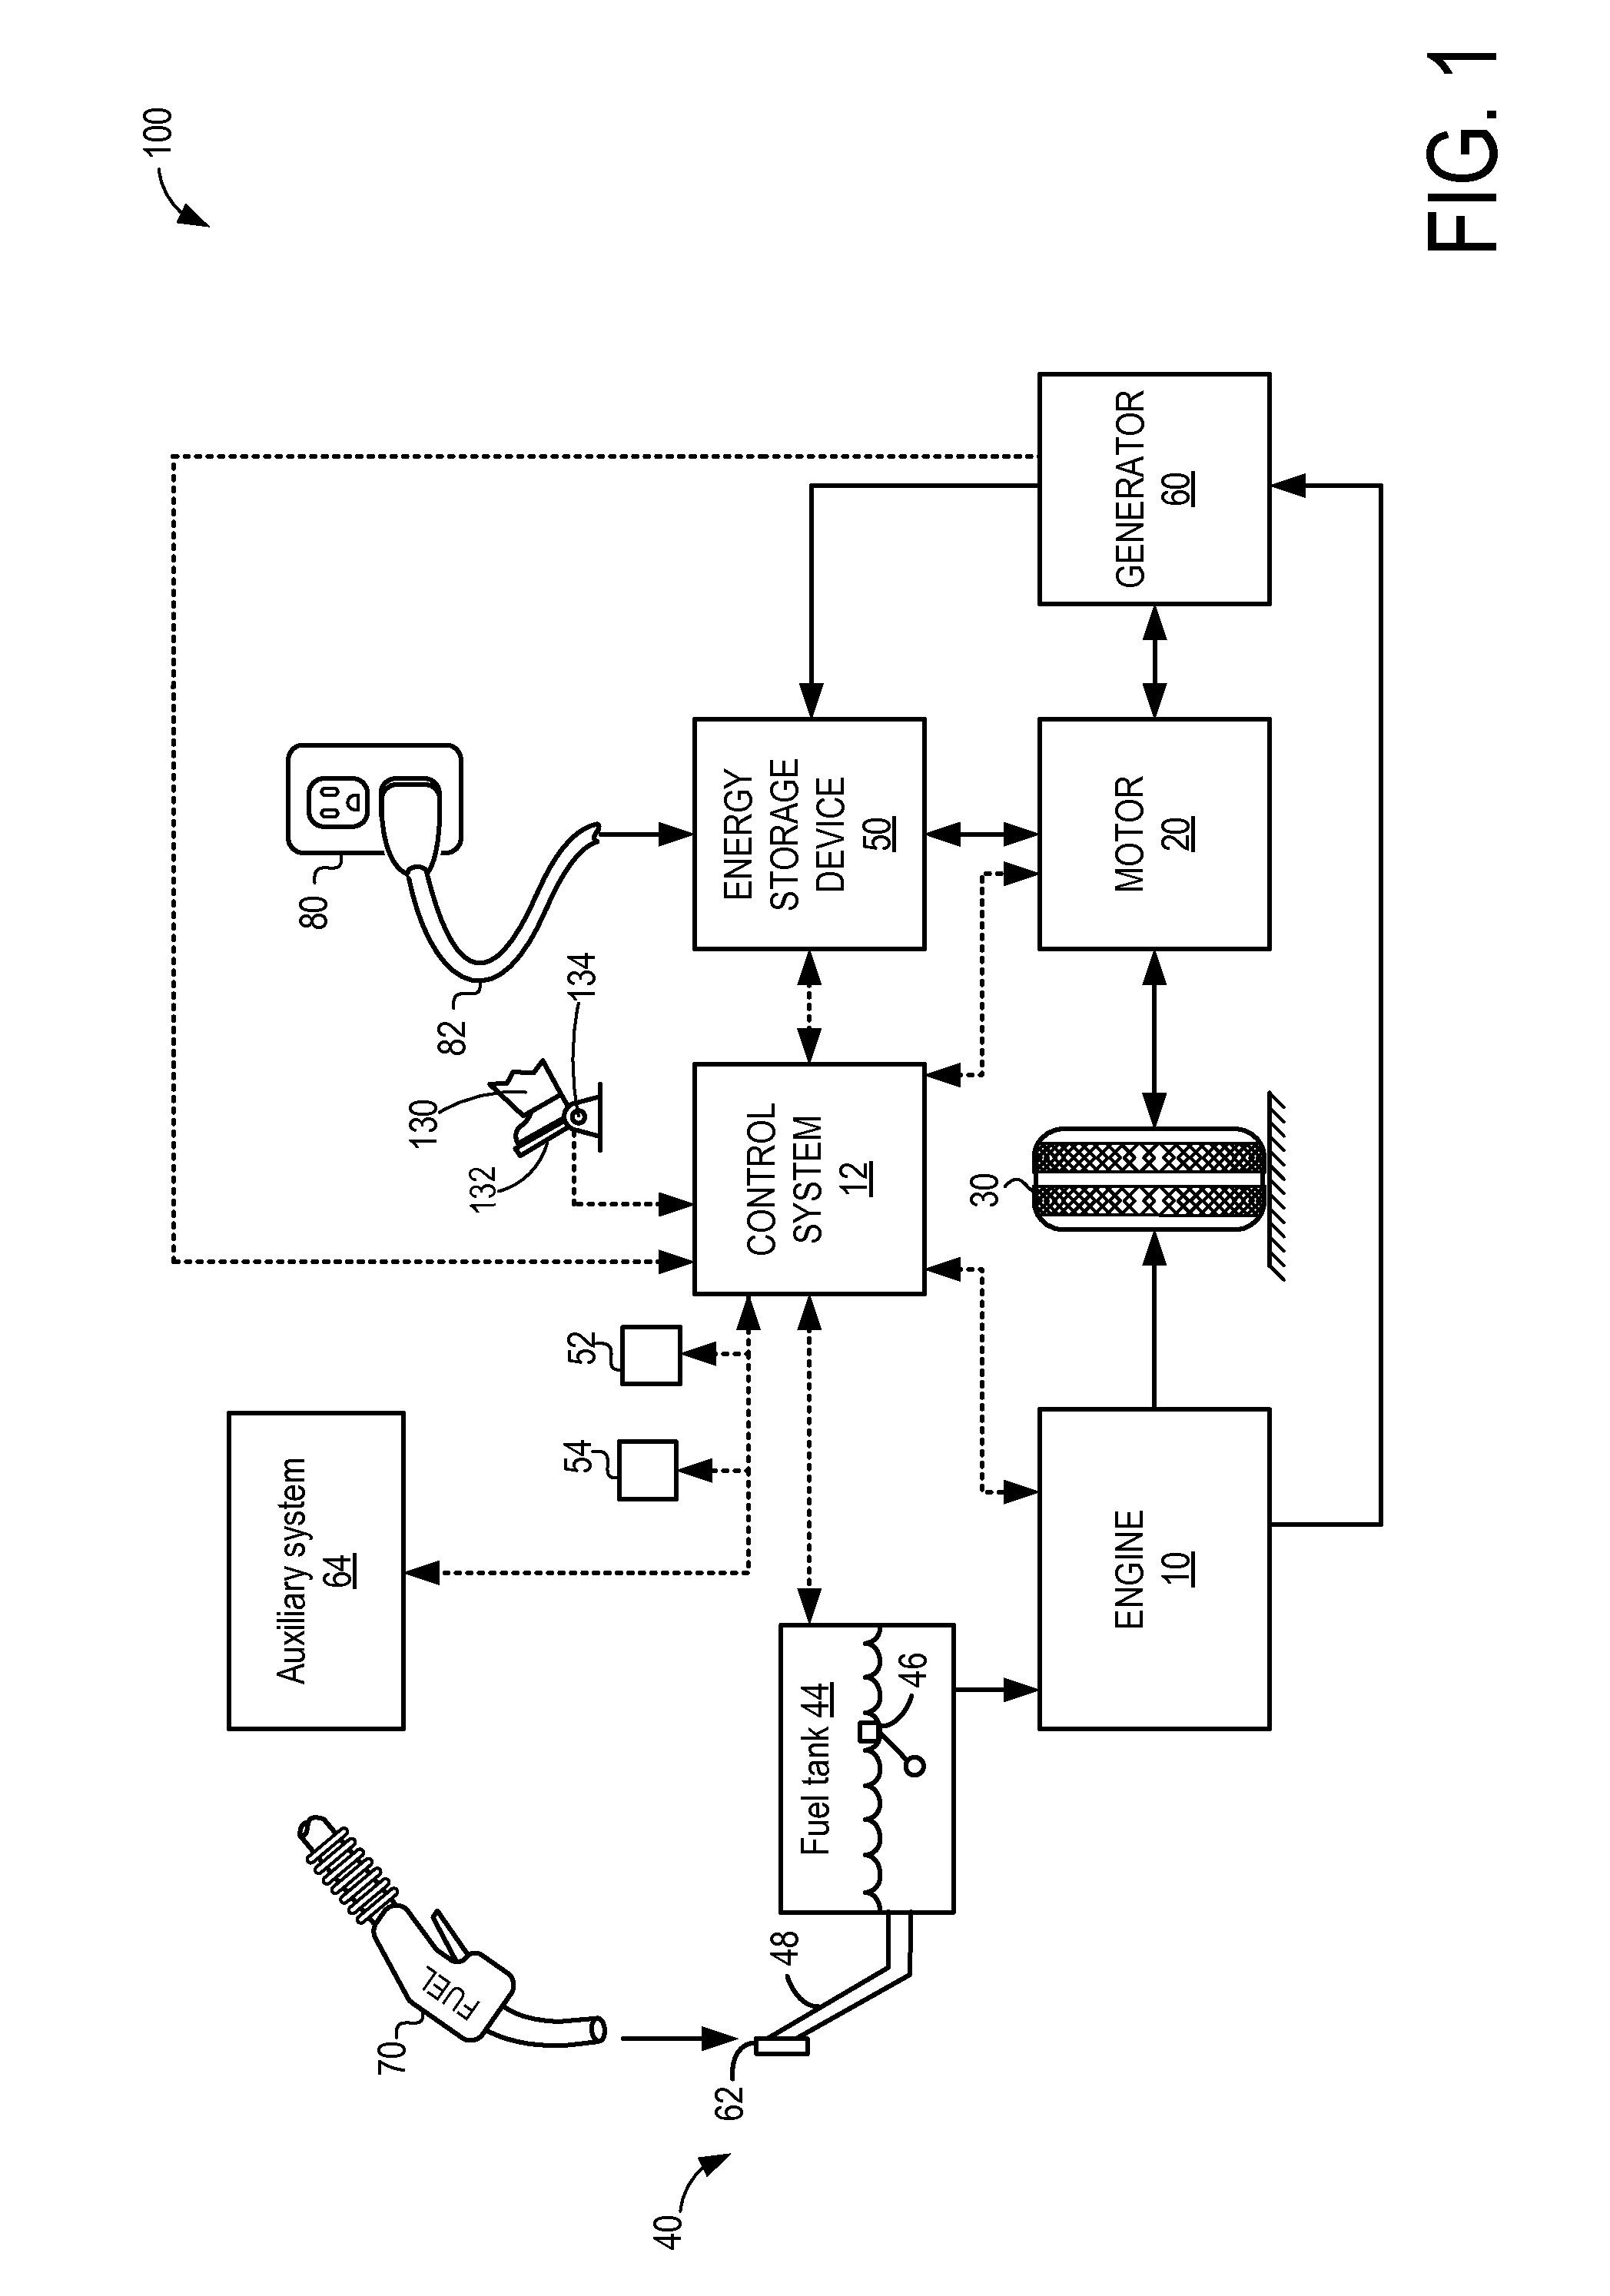 Method and system for oil dilution control